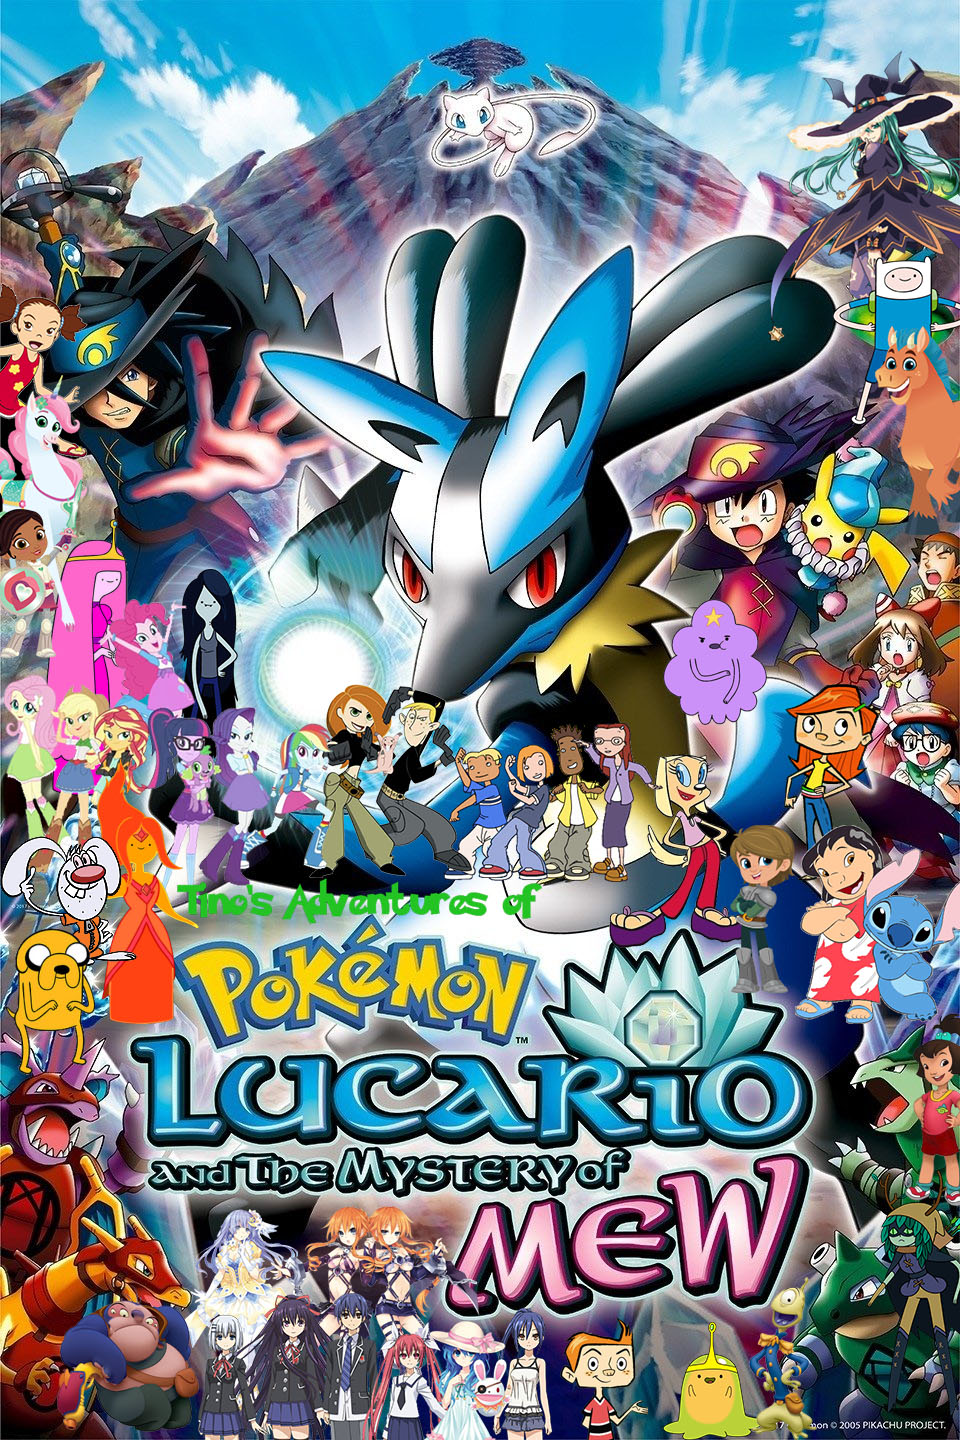 Tino S Adventures Of Pokemon Lucario And The Mystery Of Mew Pooh S Adventures Wiki Fandom